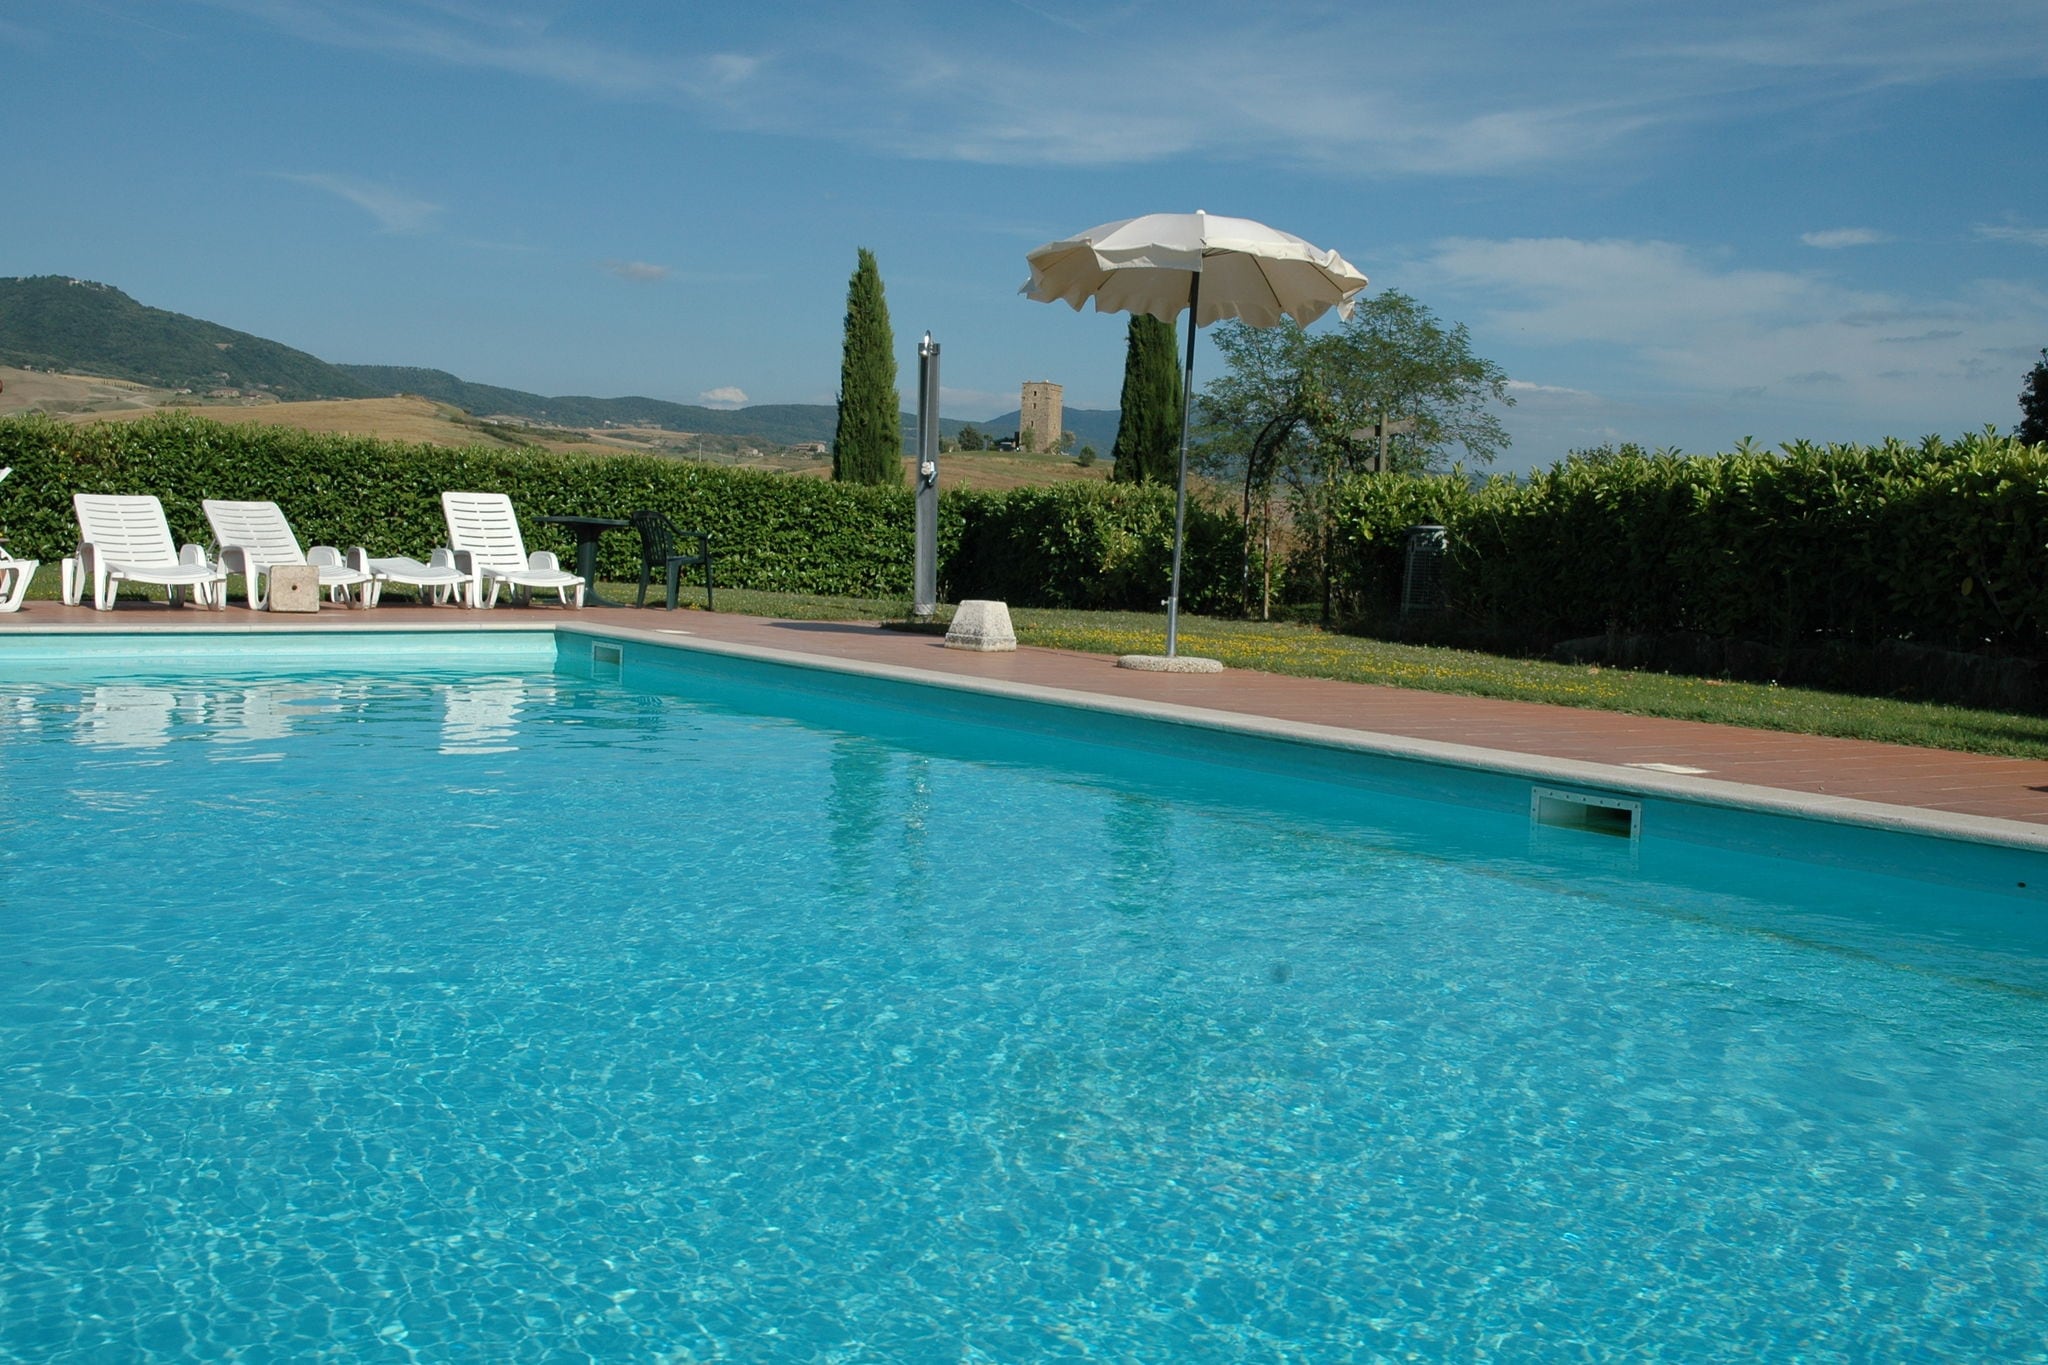 Authentic farmhouse in the Val D'Orcia with pool and stunning views